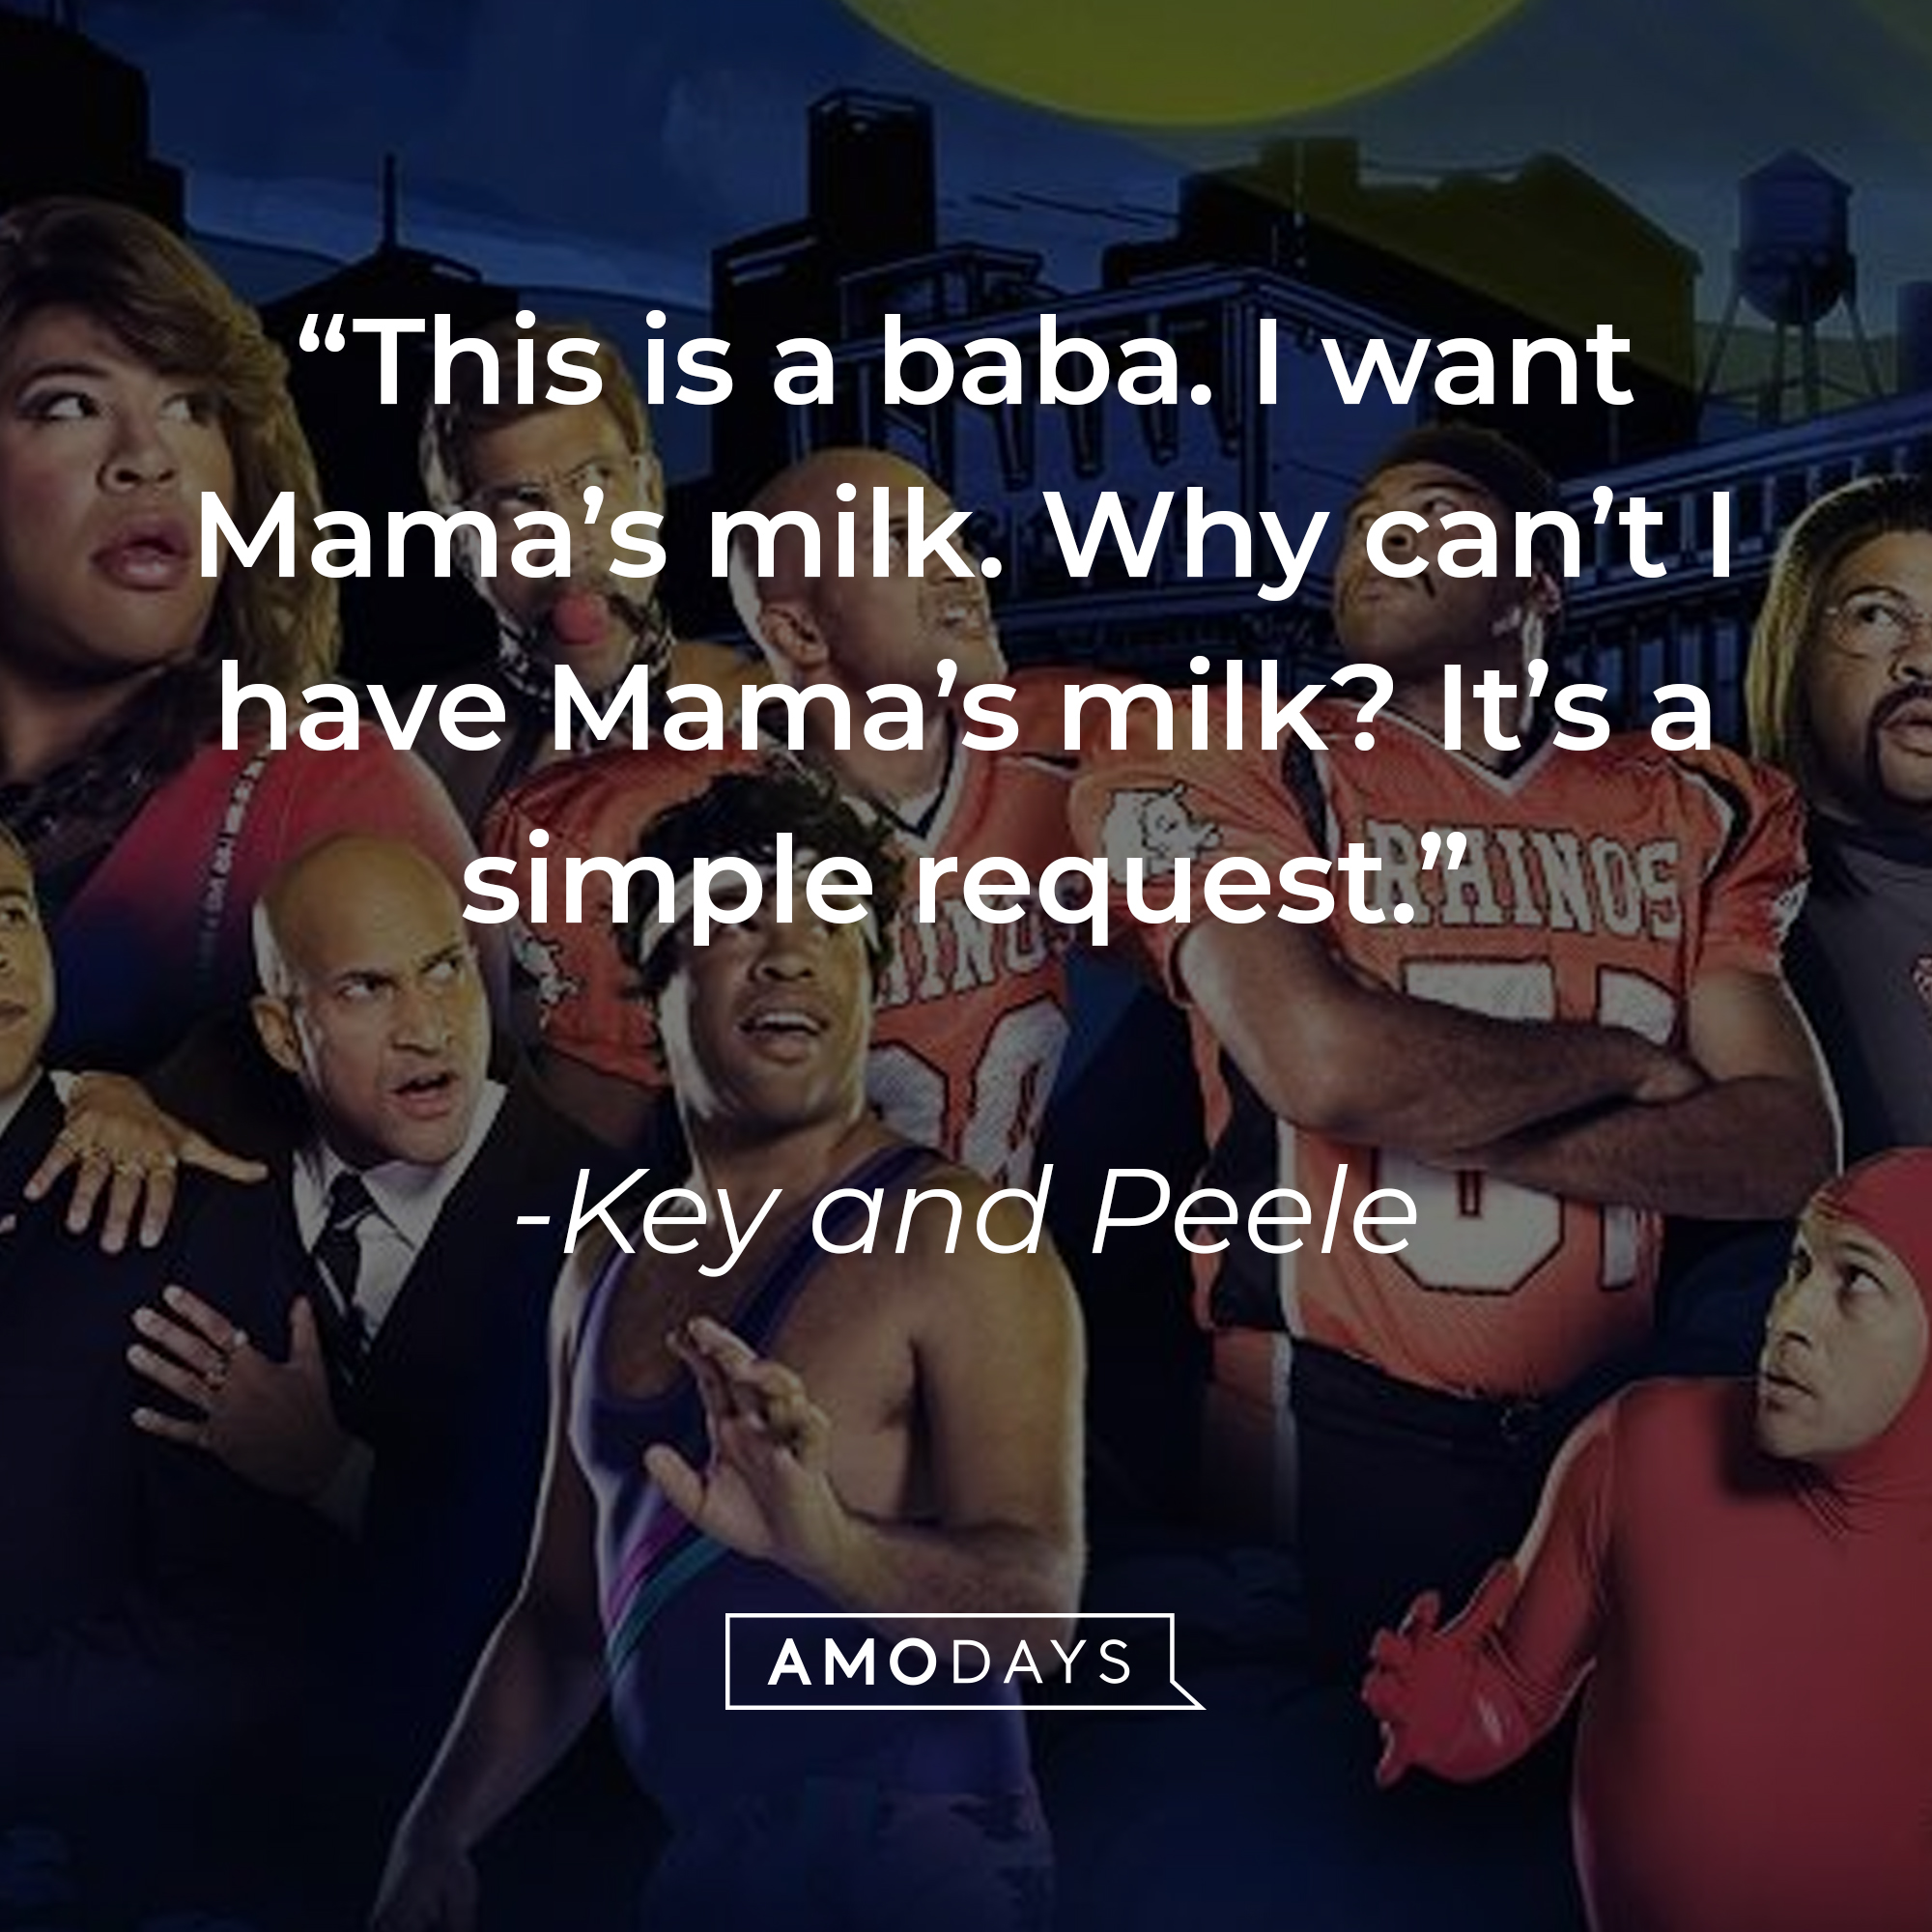 "Key and Peele's" quote: “This is a baba. I want Mama’s milk. Why can’t I have Mama’s milk? It’s a simple request.” | Source: facebook.com/KeyAndPeele